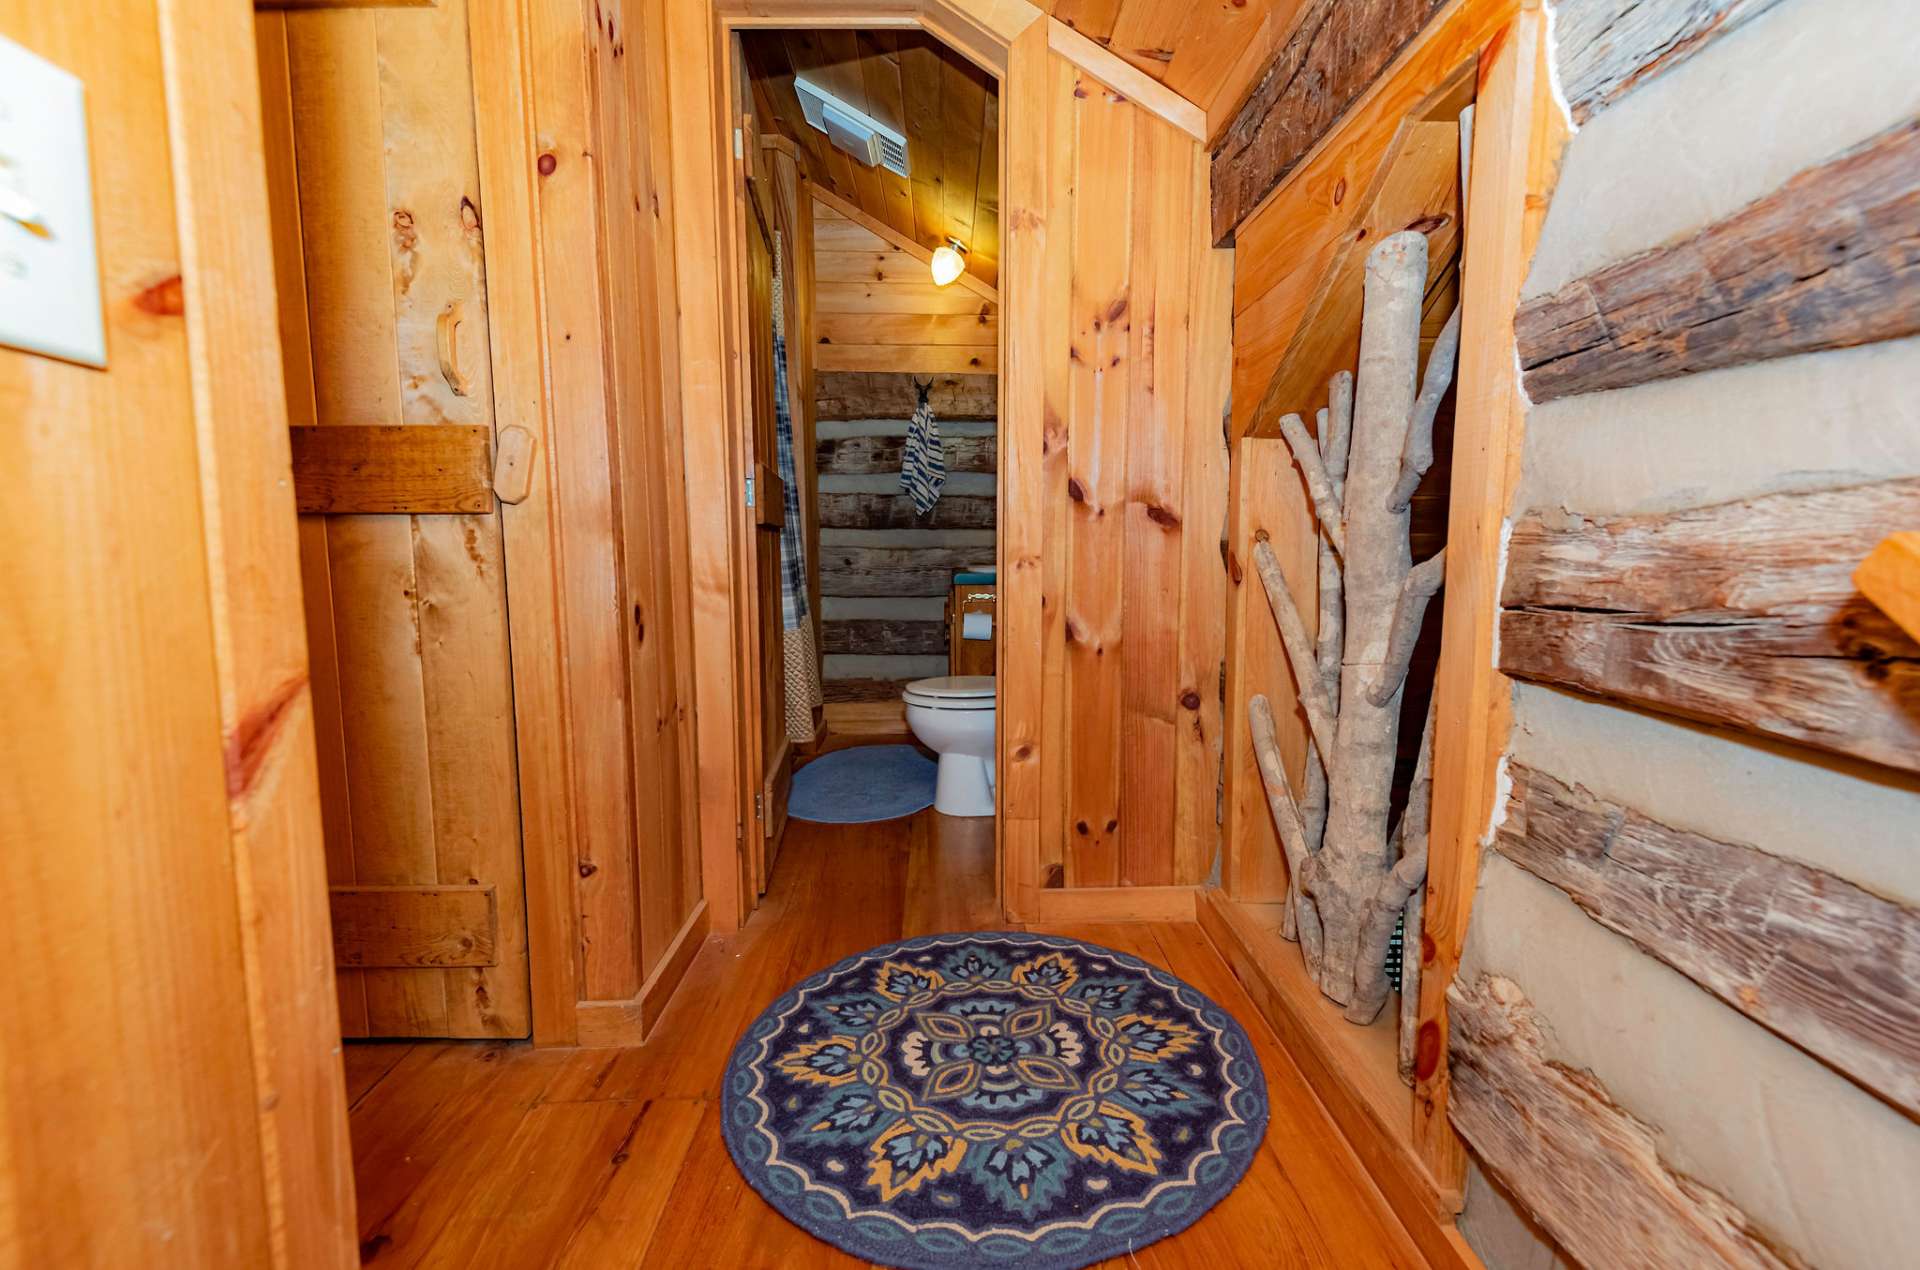 Every log cabin in Stonebridge share the same characteristics and each cabin has a feature that sets it apart from others.